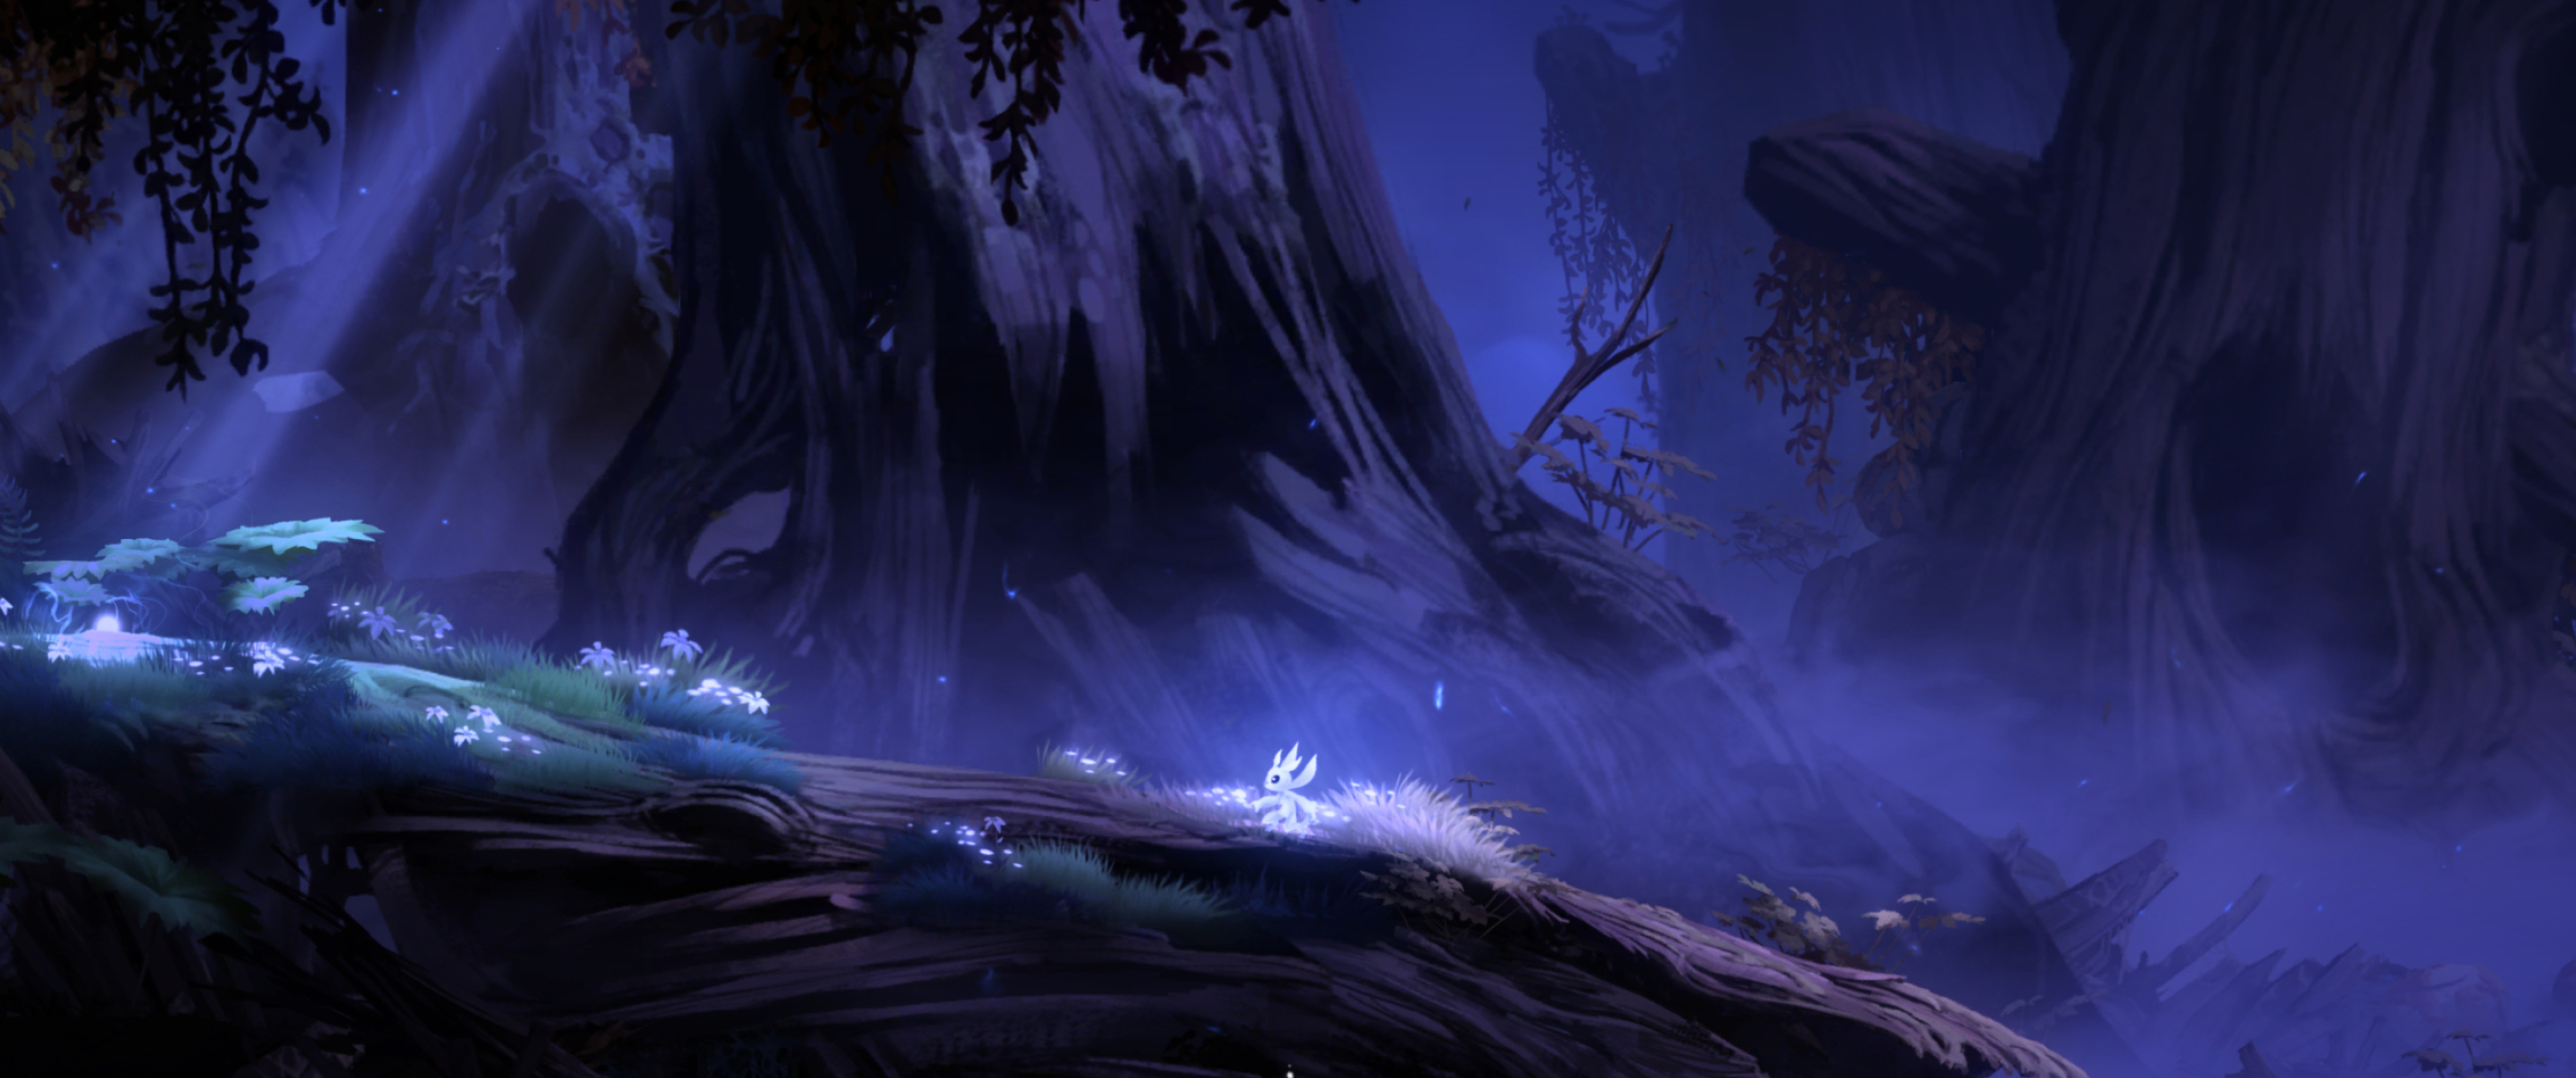 3440x1440 Ori and the Blind Forest looks amazing in Ultrawide. This is the first platformer I've honestly ever played in full ascended glory : r/ultrawidemasterrace